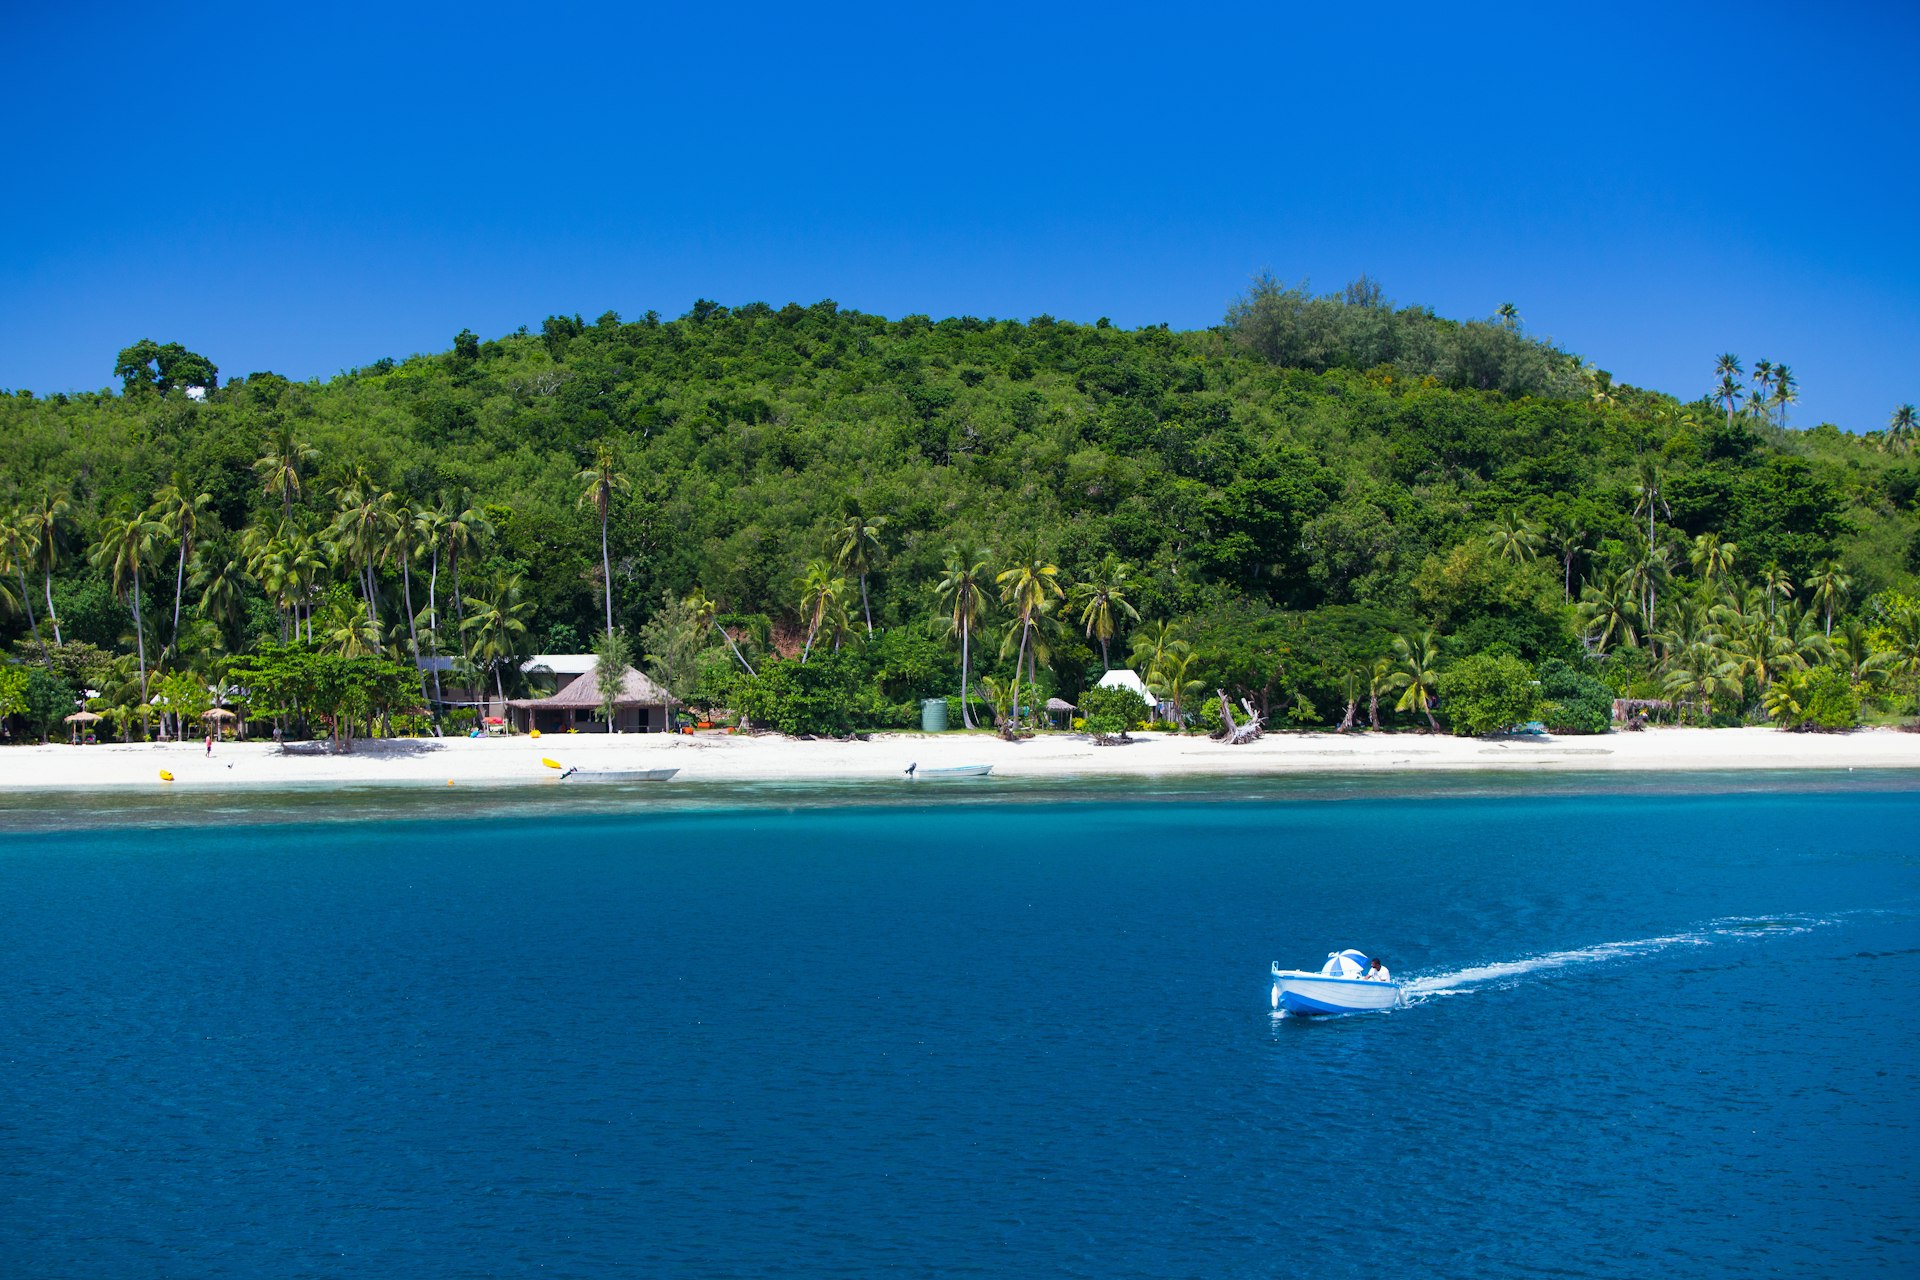 A water taxi makes its way across blue water along the shores of Yasawa Island